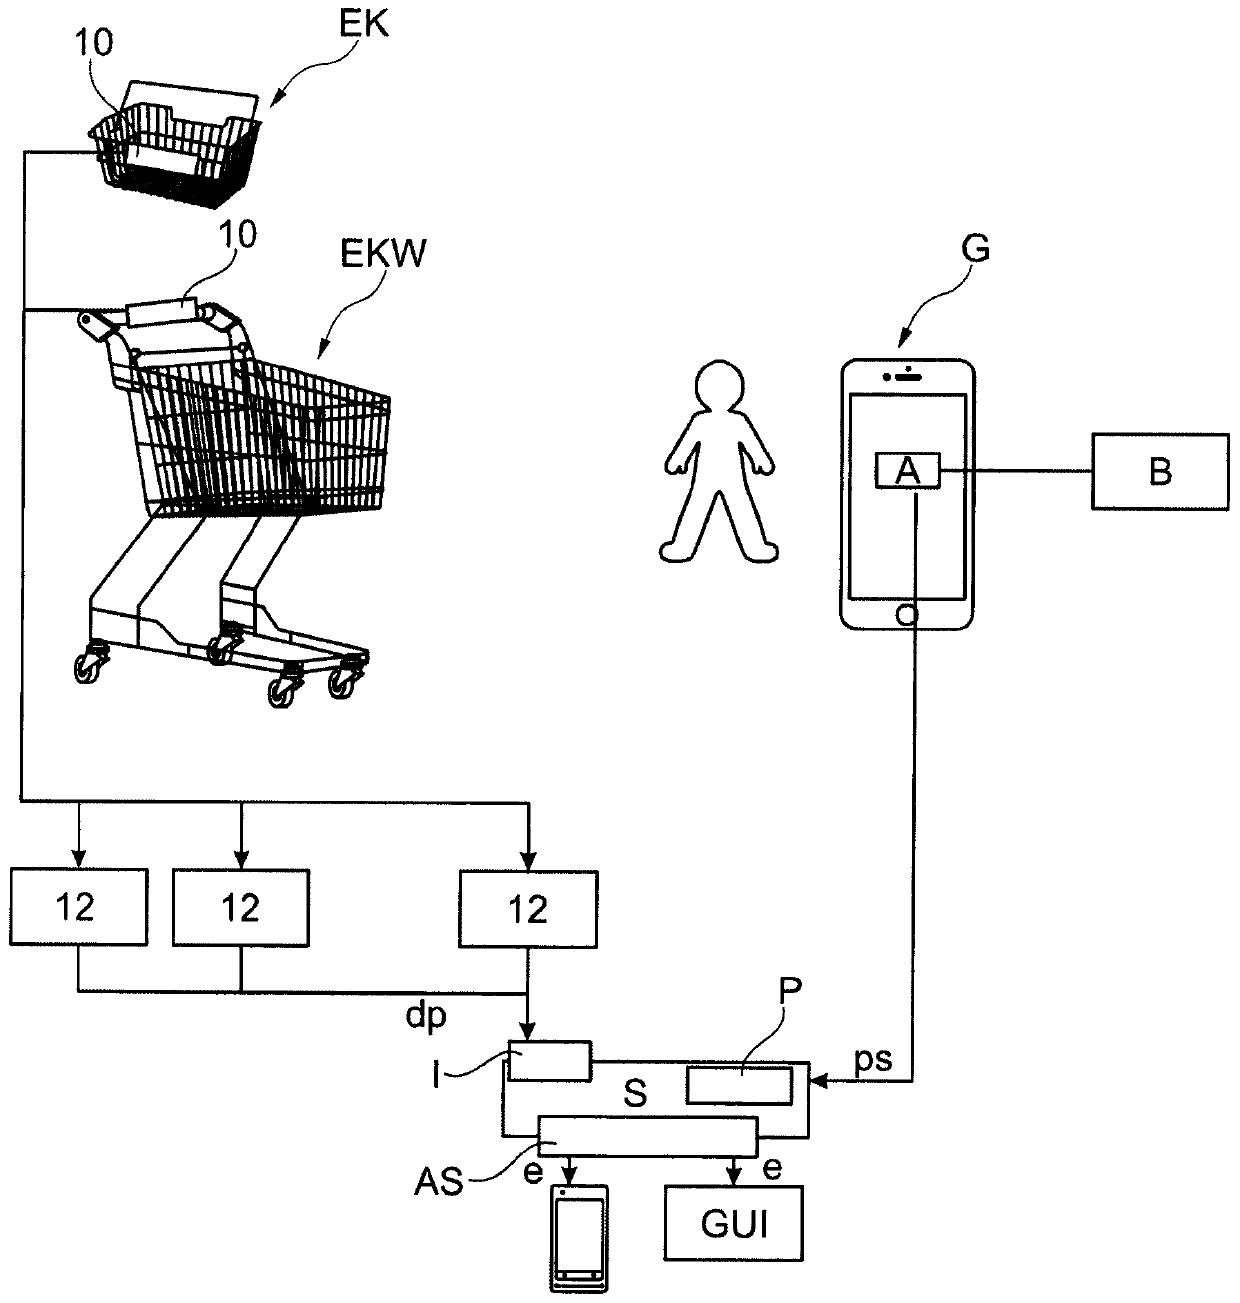 Shopping trolley security system